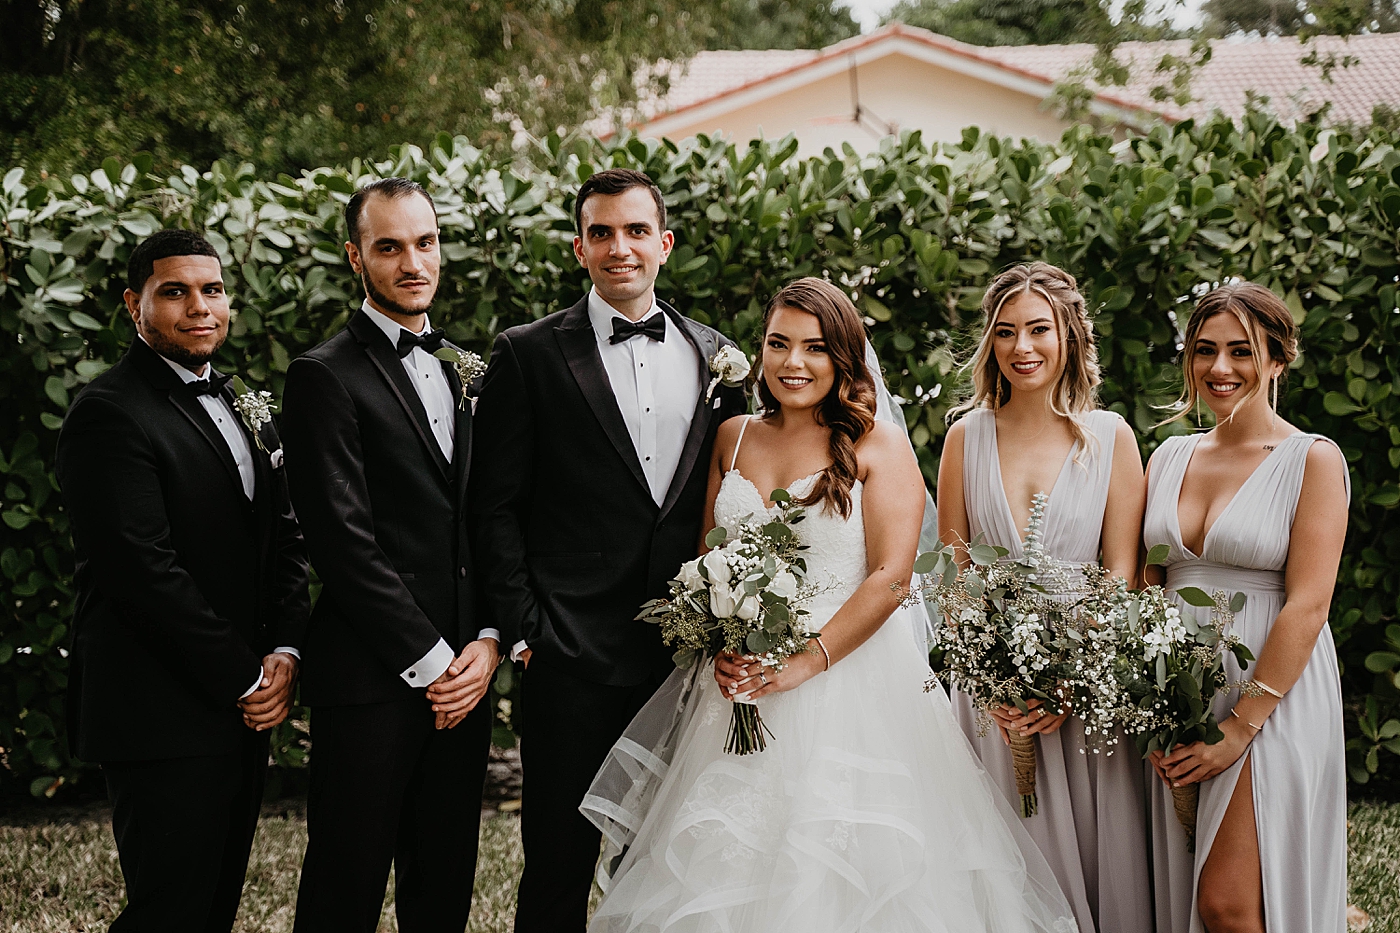 Bridal party portrait Intimate South Florida Wedding Photography captured by Wedding Photographer Krystal Capone Photography